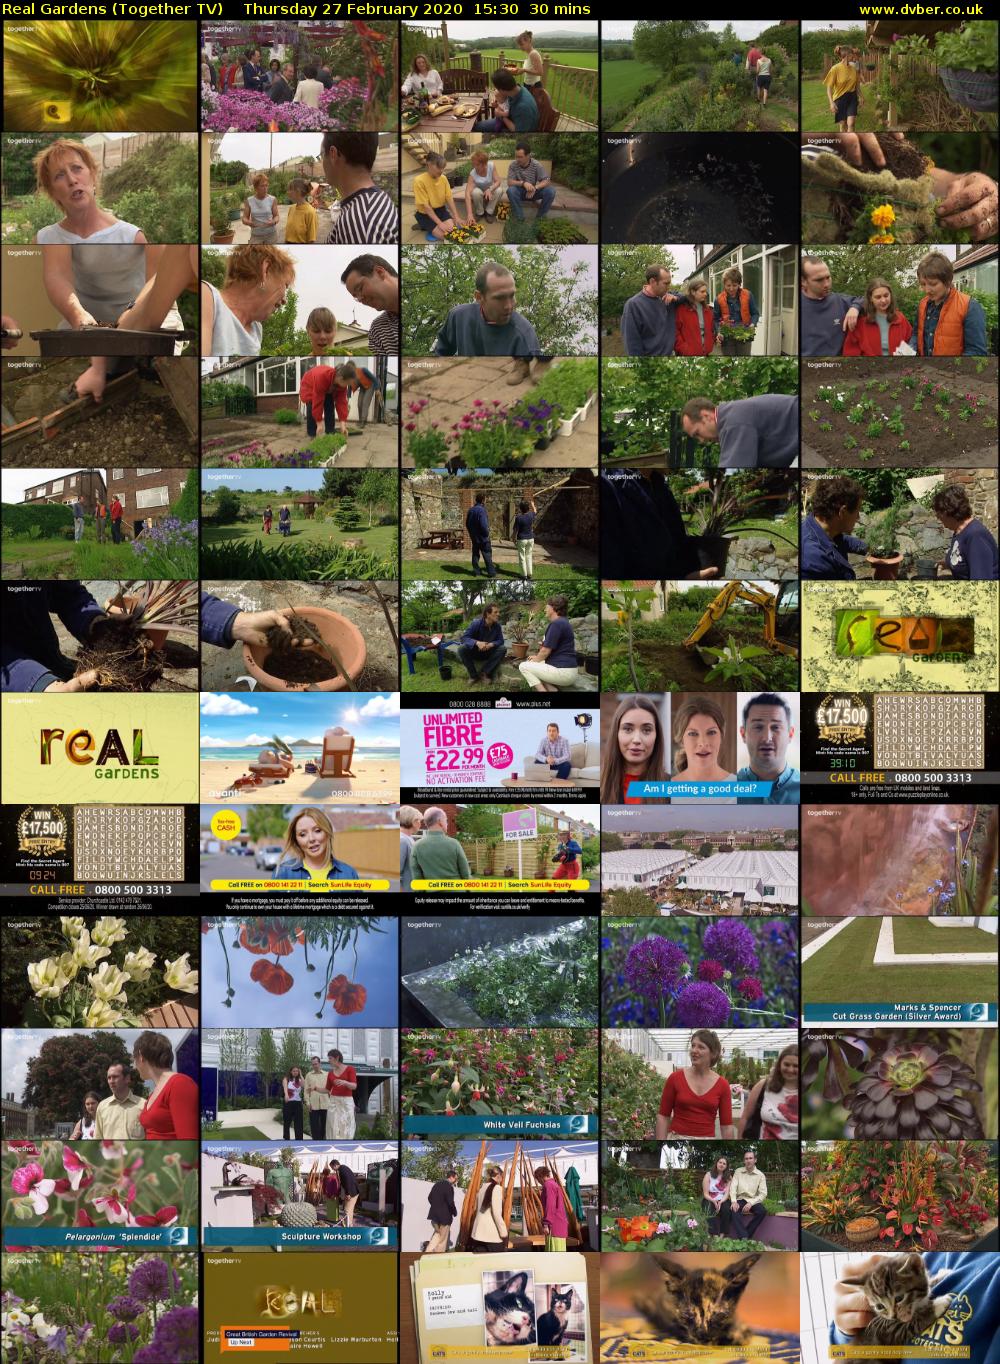 Real Gardens (Together TV) Thursday 27 February 2020 15:30 - 16:00